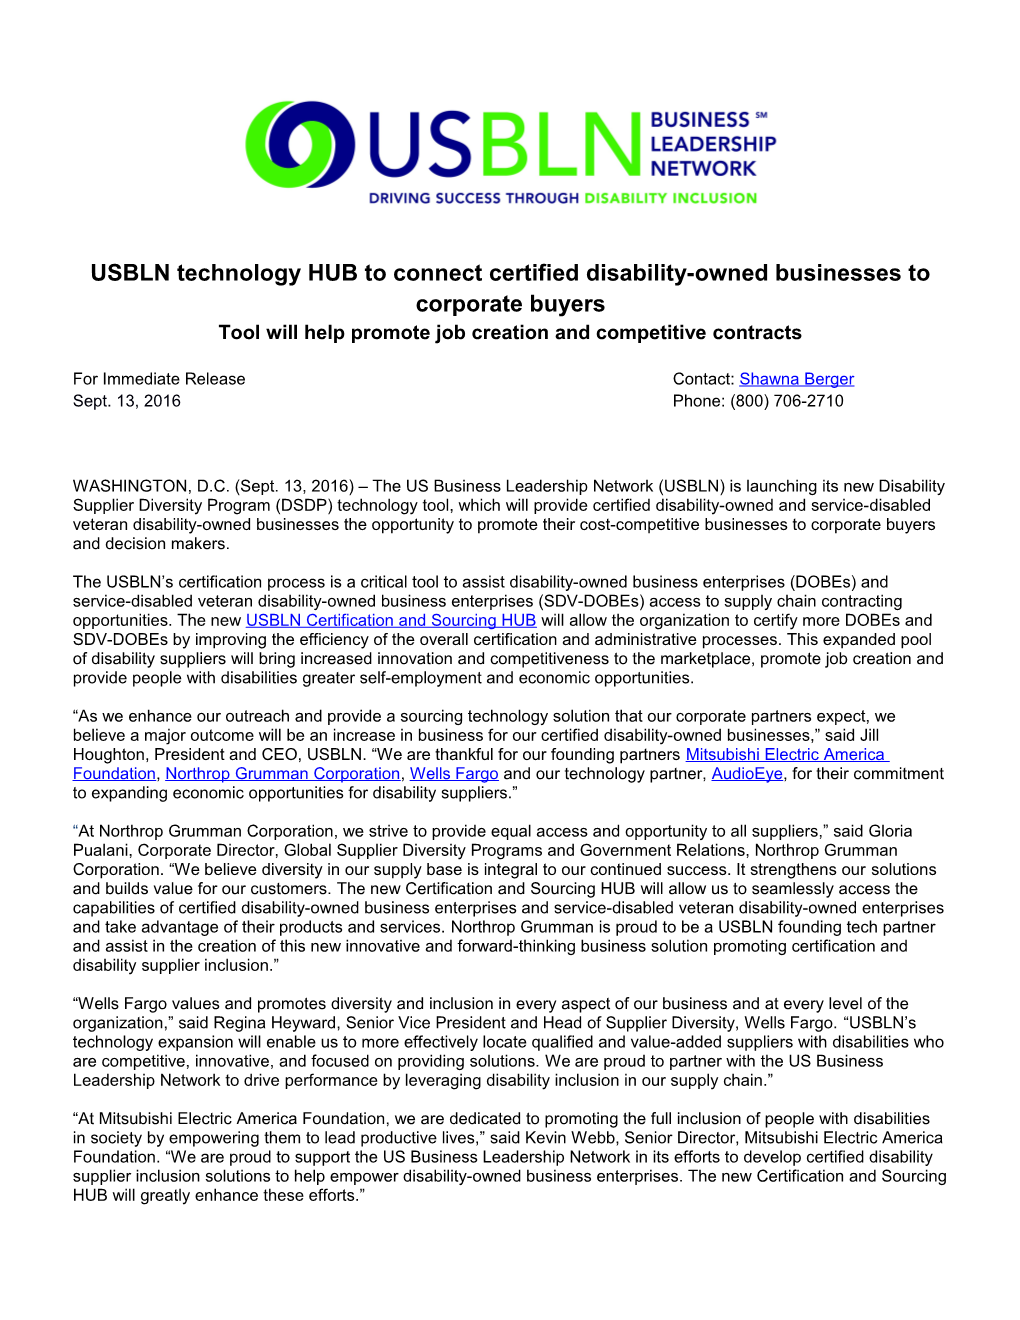 USBLN Technology HUB to Connect Certified Disability-Owned Businesses to Corporate Buyers